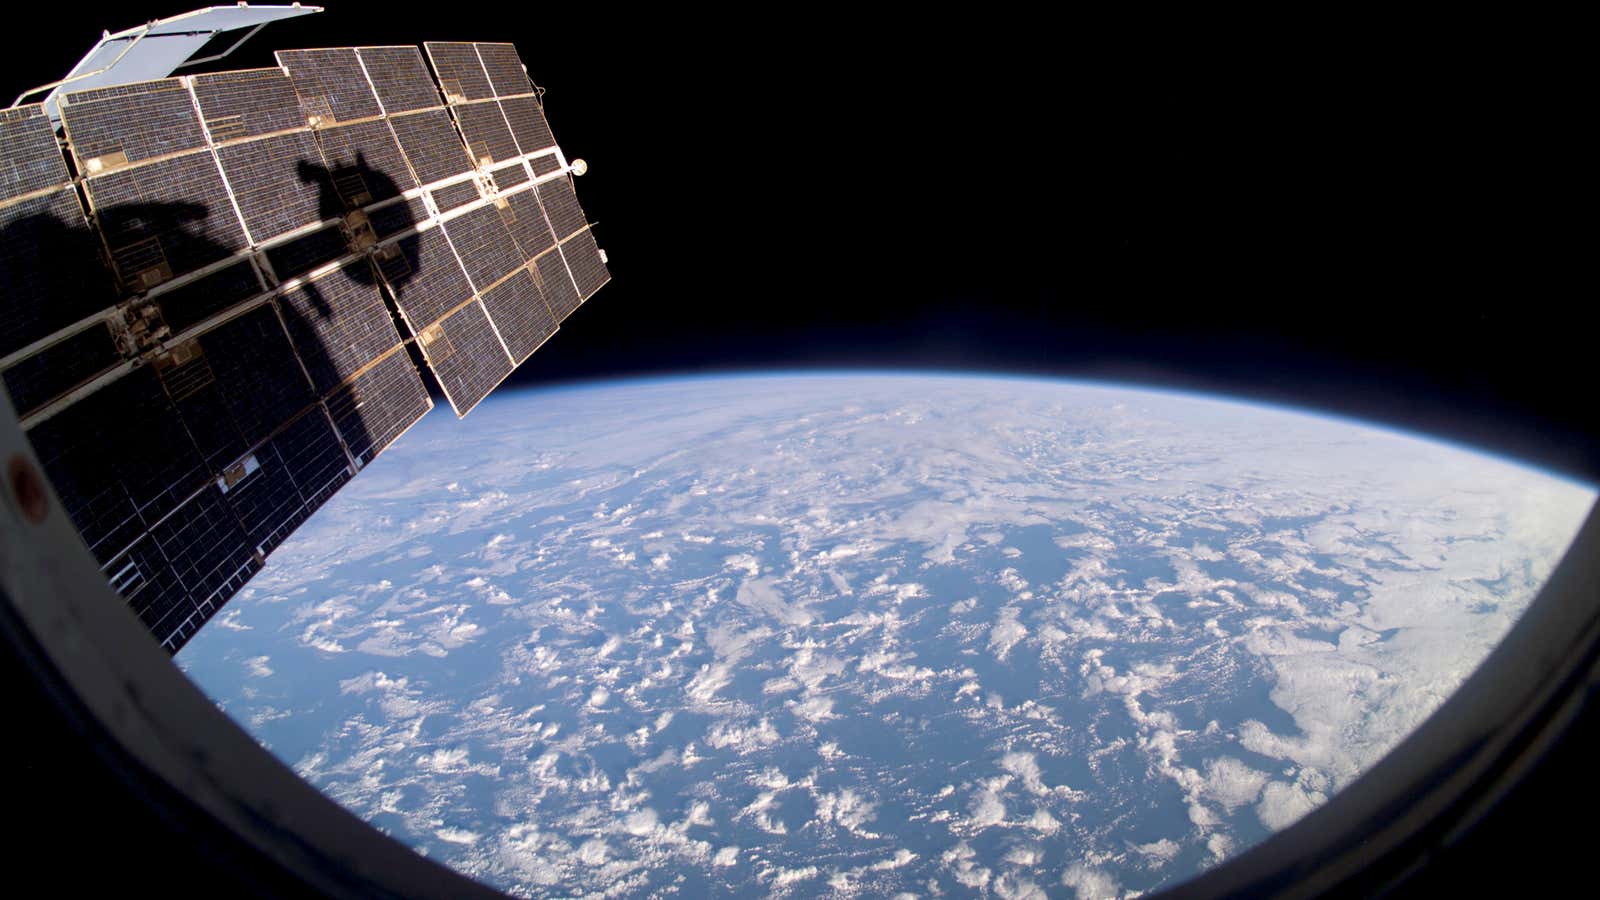 It might not be too long before tourists take in the same view from the International Space Station